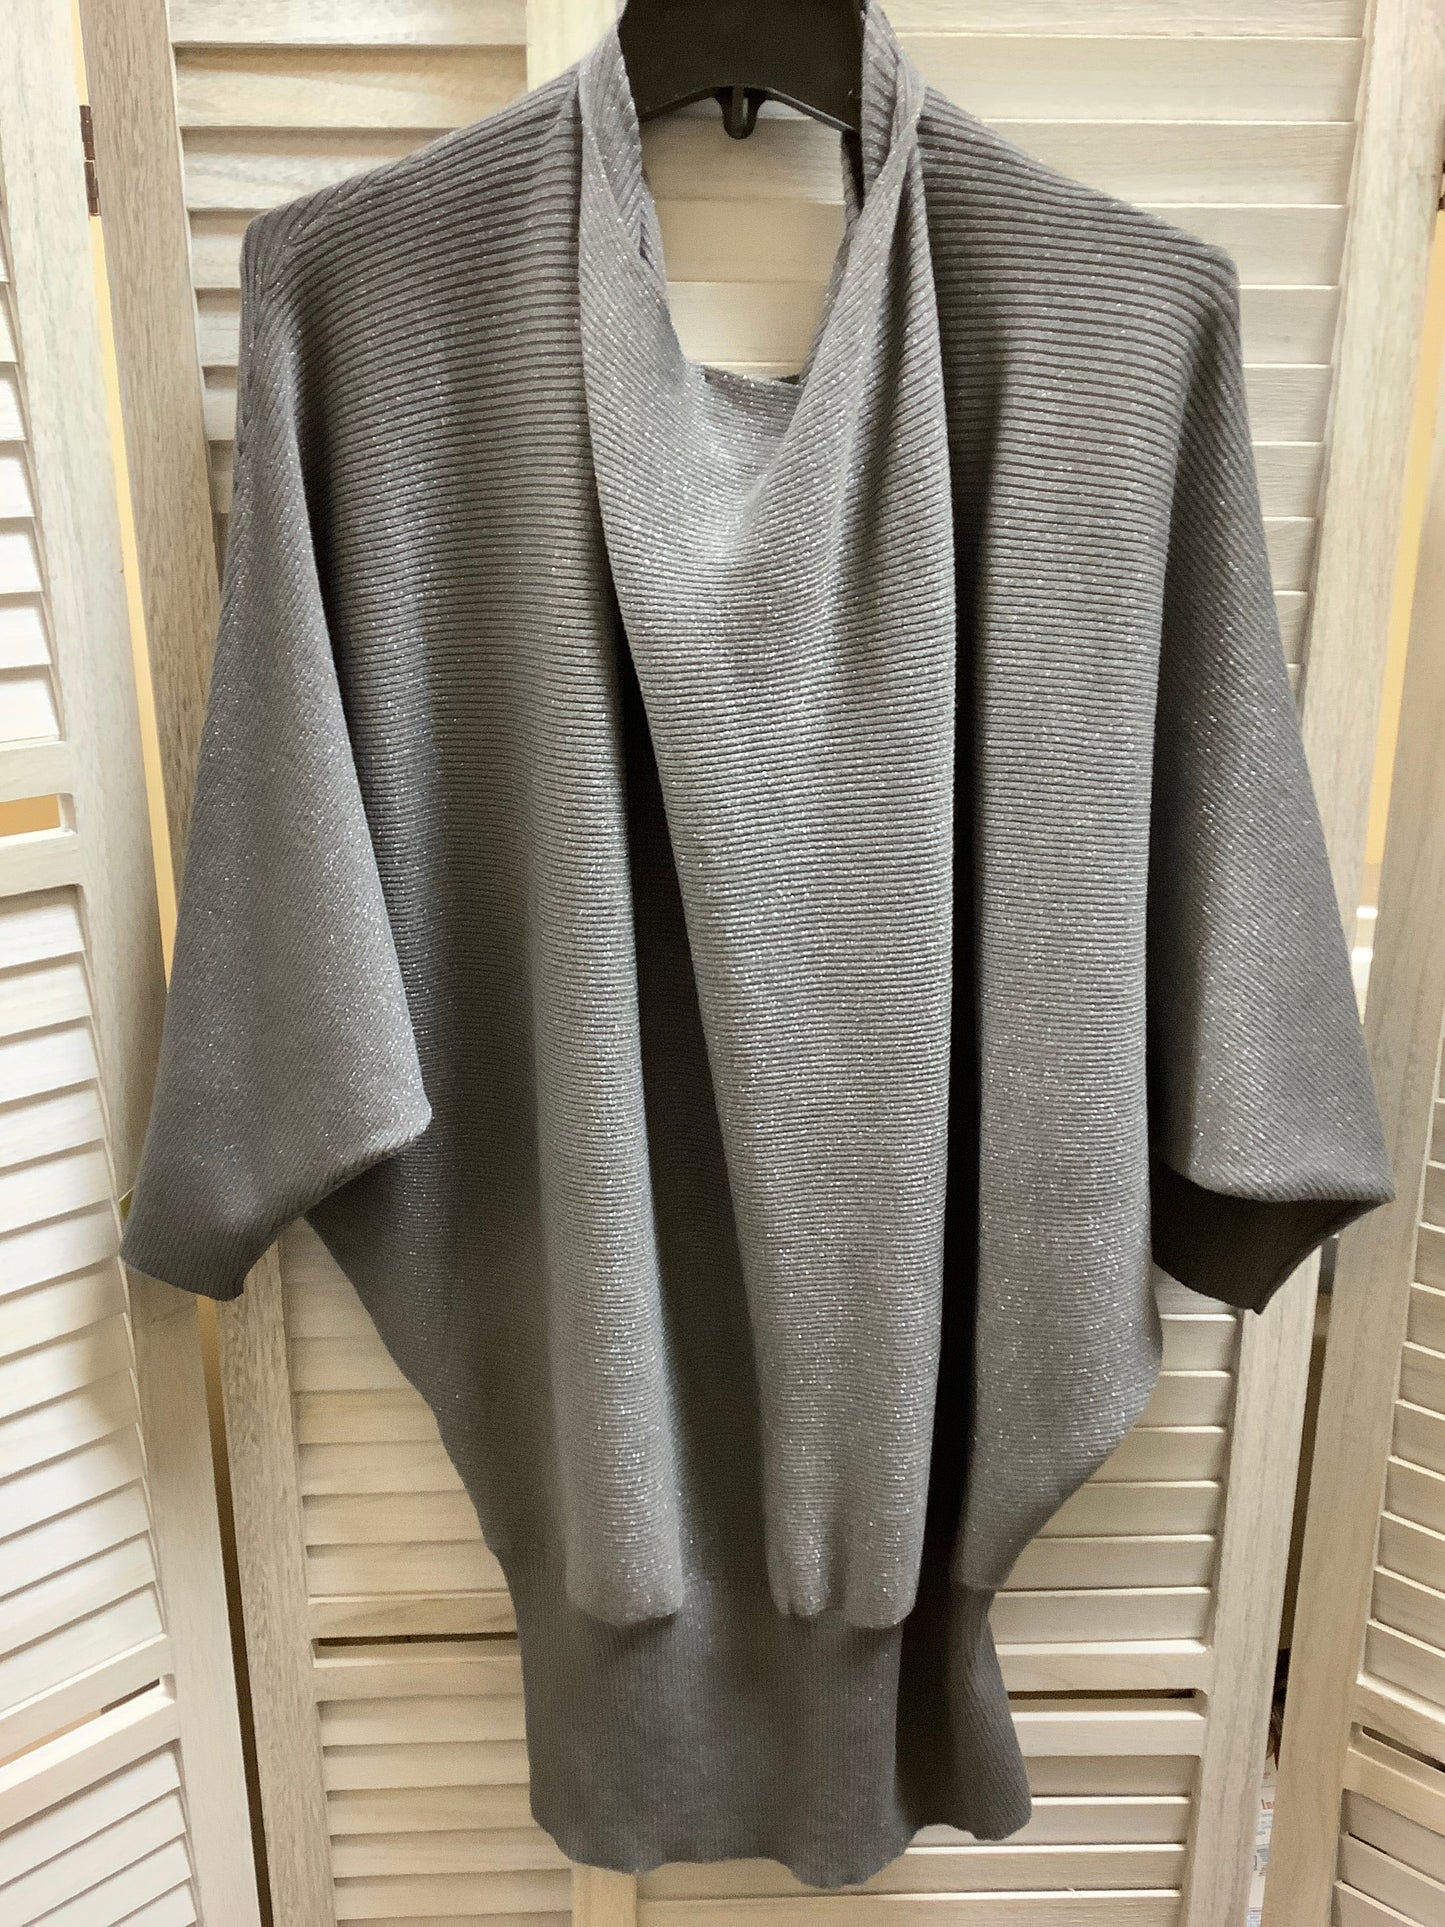 Sweater By New York And Co  Size: 2x